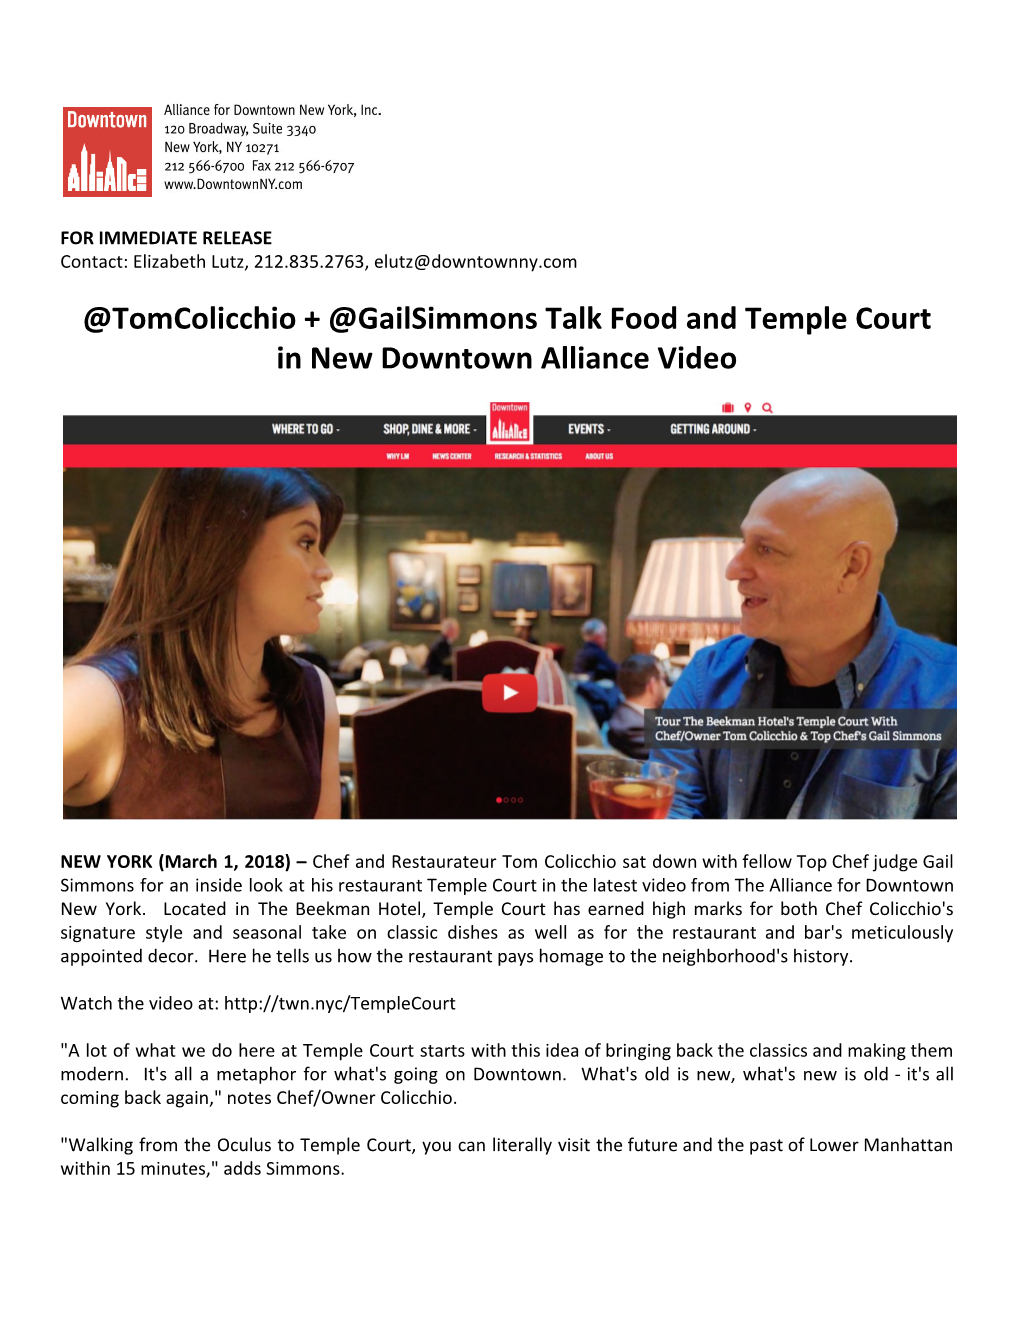 @Tomcolicchio + @Gailsimmons Talk Food and Temple Court in New Downtown Alliance Video